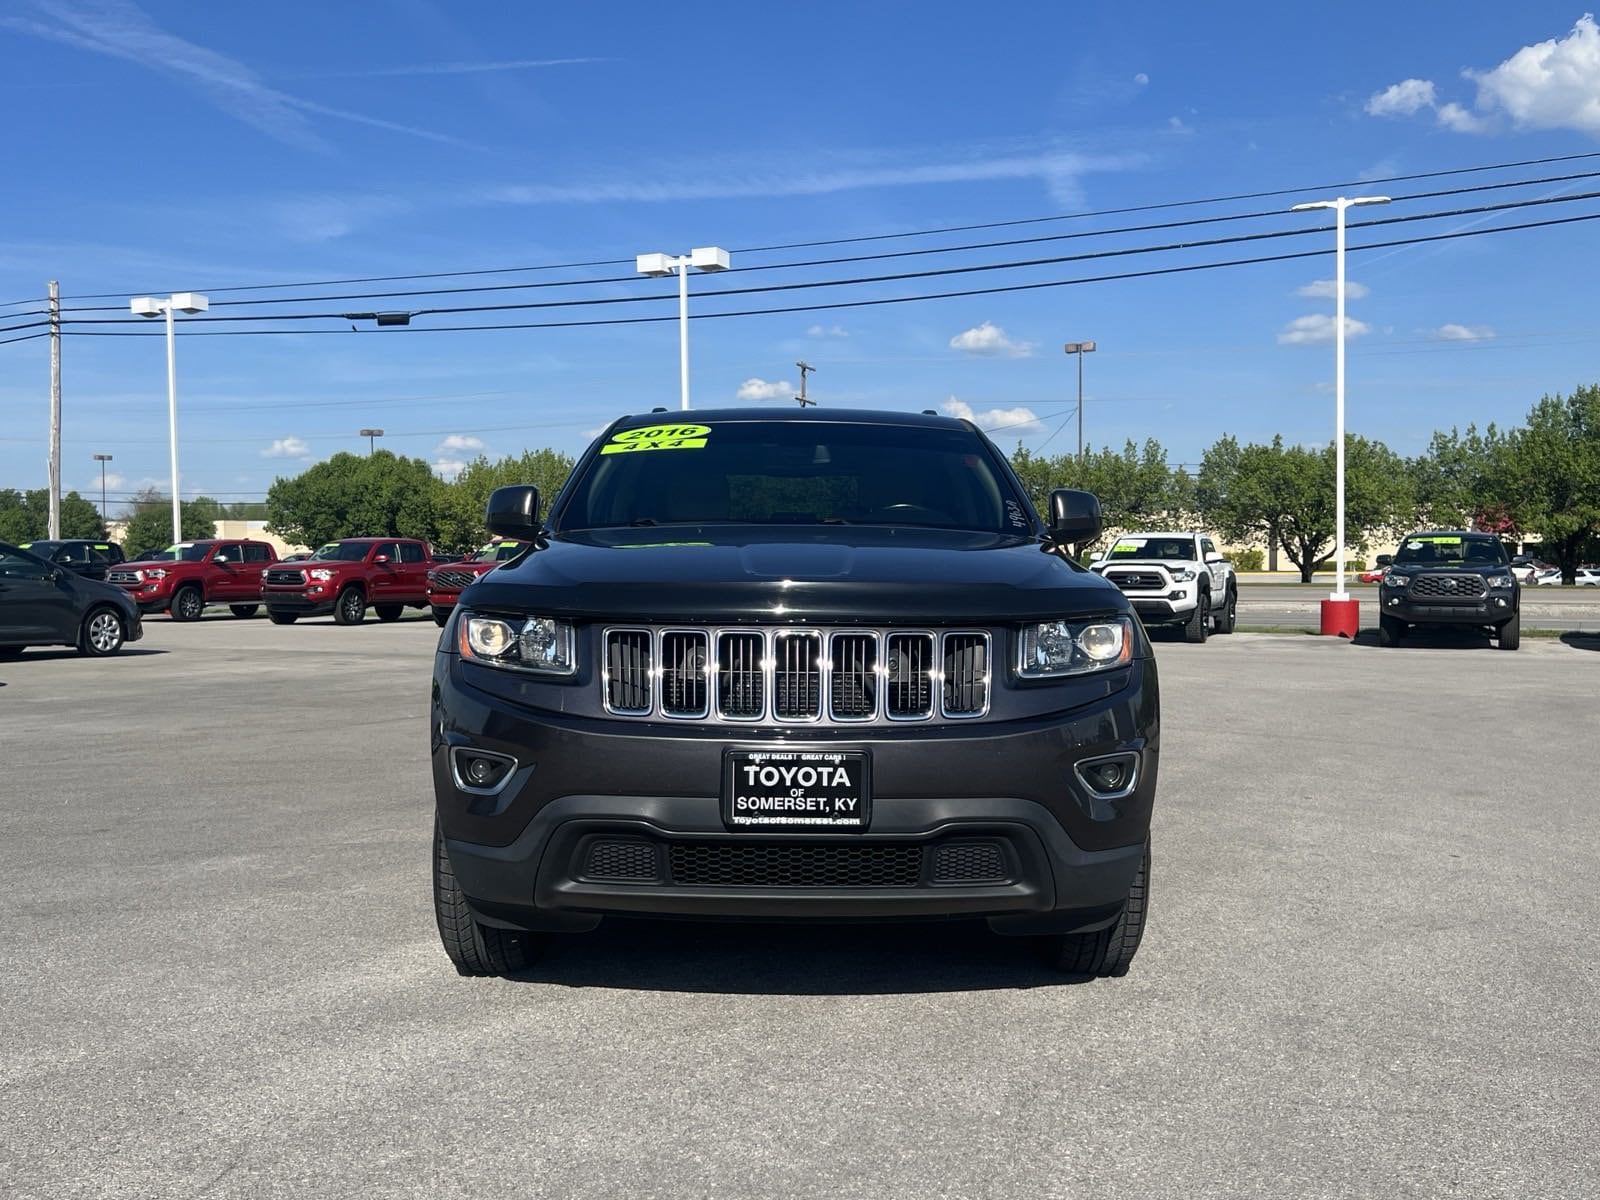 Used 2016 Jeep Grand Cherokee Laredo E with VIN 1C4RJFAG7GC343089 for sale in Somerset, KY